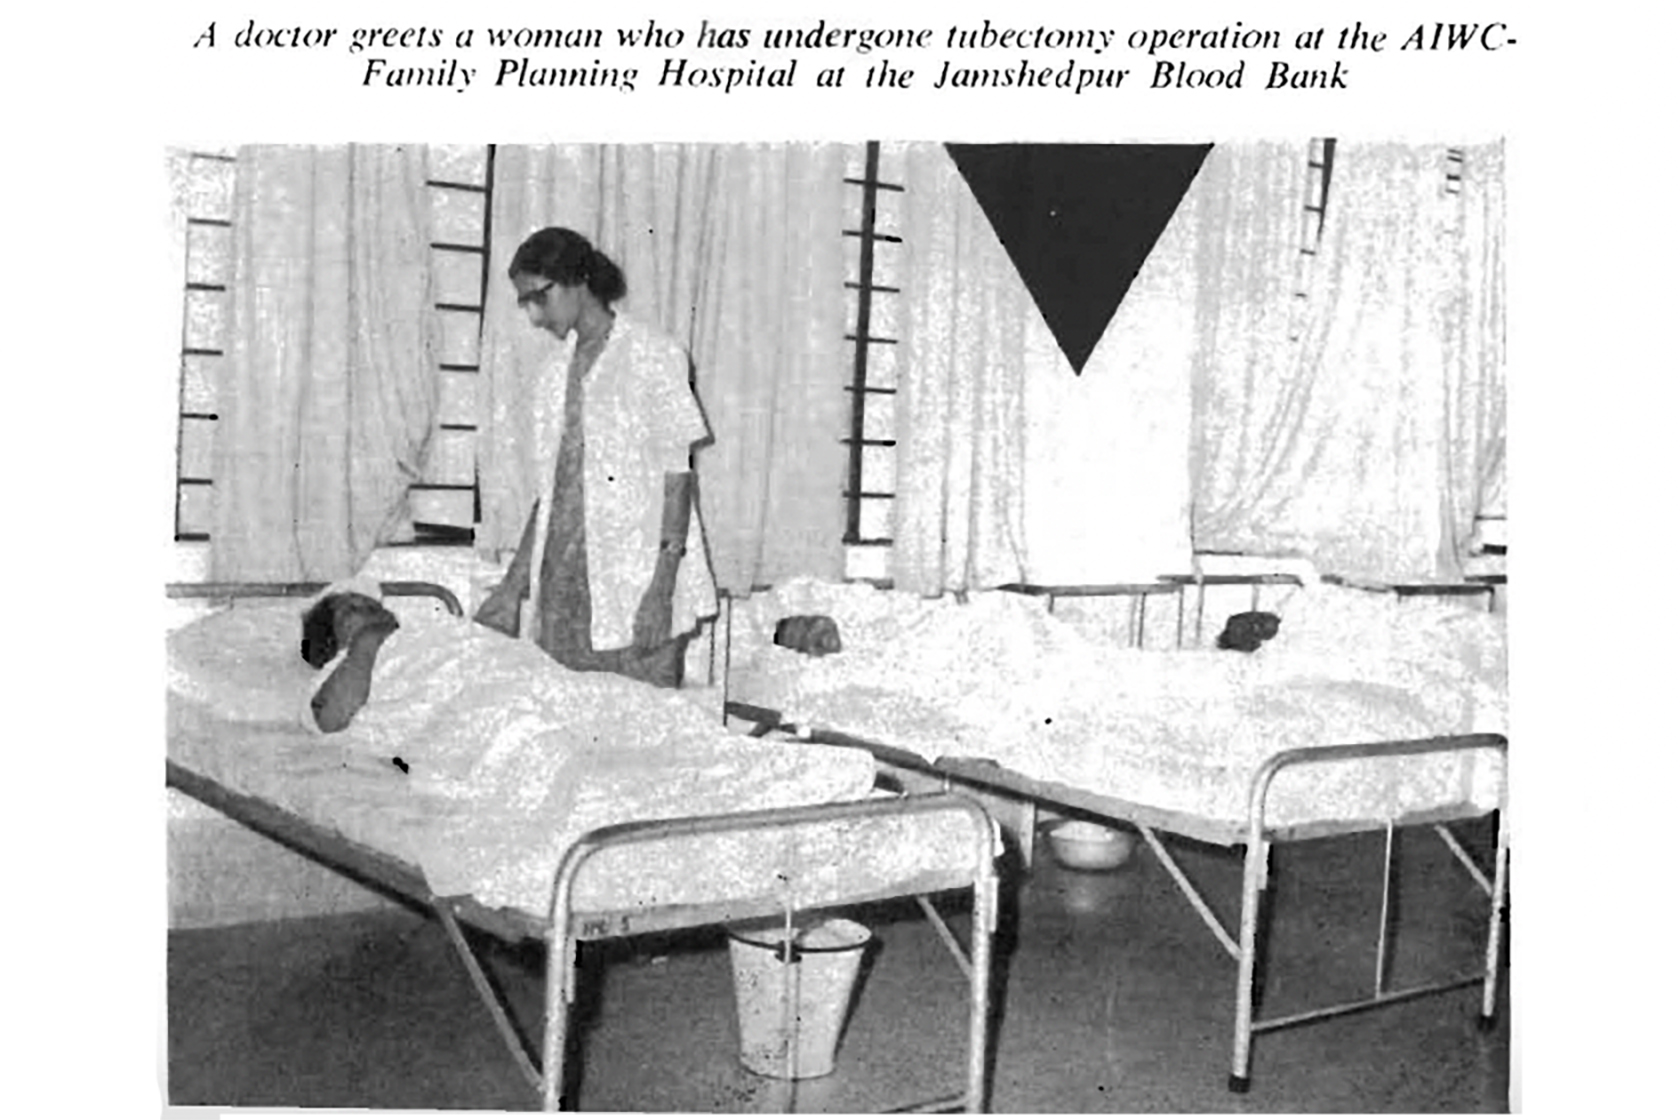 A black-and-white photograph from 1976 shows a female doctor leaning over the bed of a patient recovering from surgery. The image caption reads: “A doctor greets a woman who has undergone tubectomy operation at the AIWC-Family Planning Hospital at the Jamshedpur Blood Bank.”